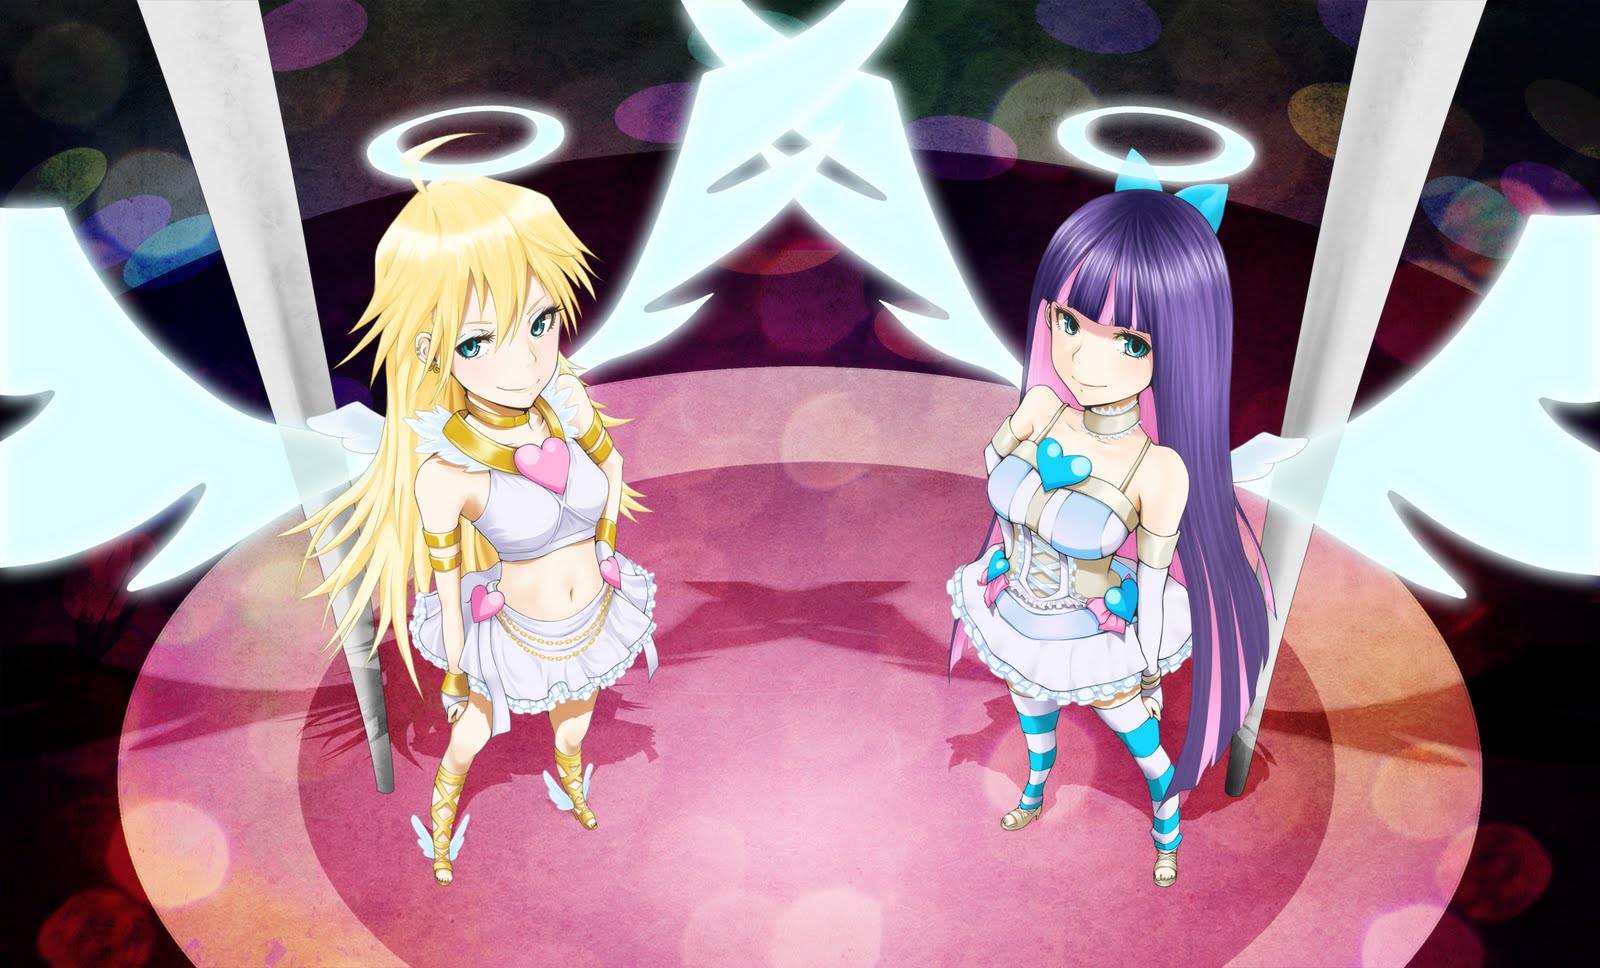 Panty-and-Stocking-with-Garterbelt-Anarchy-Sisters.jpg